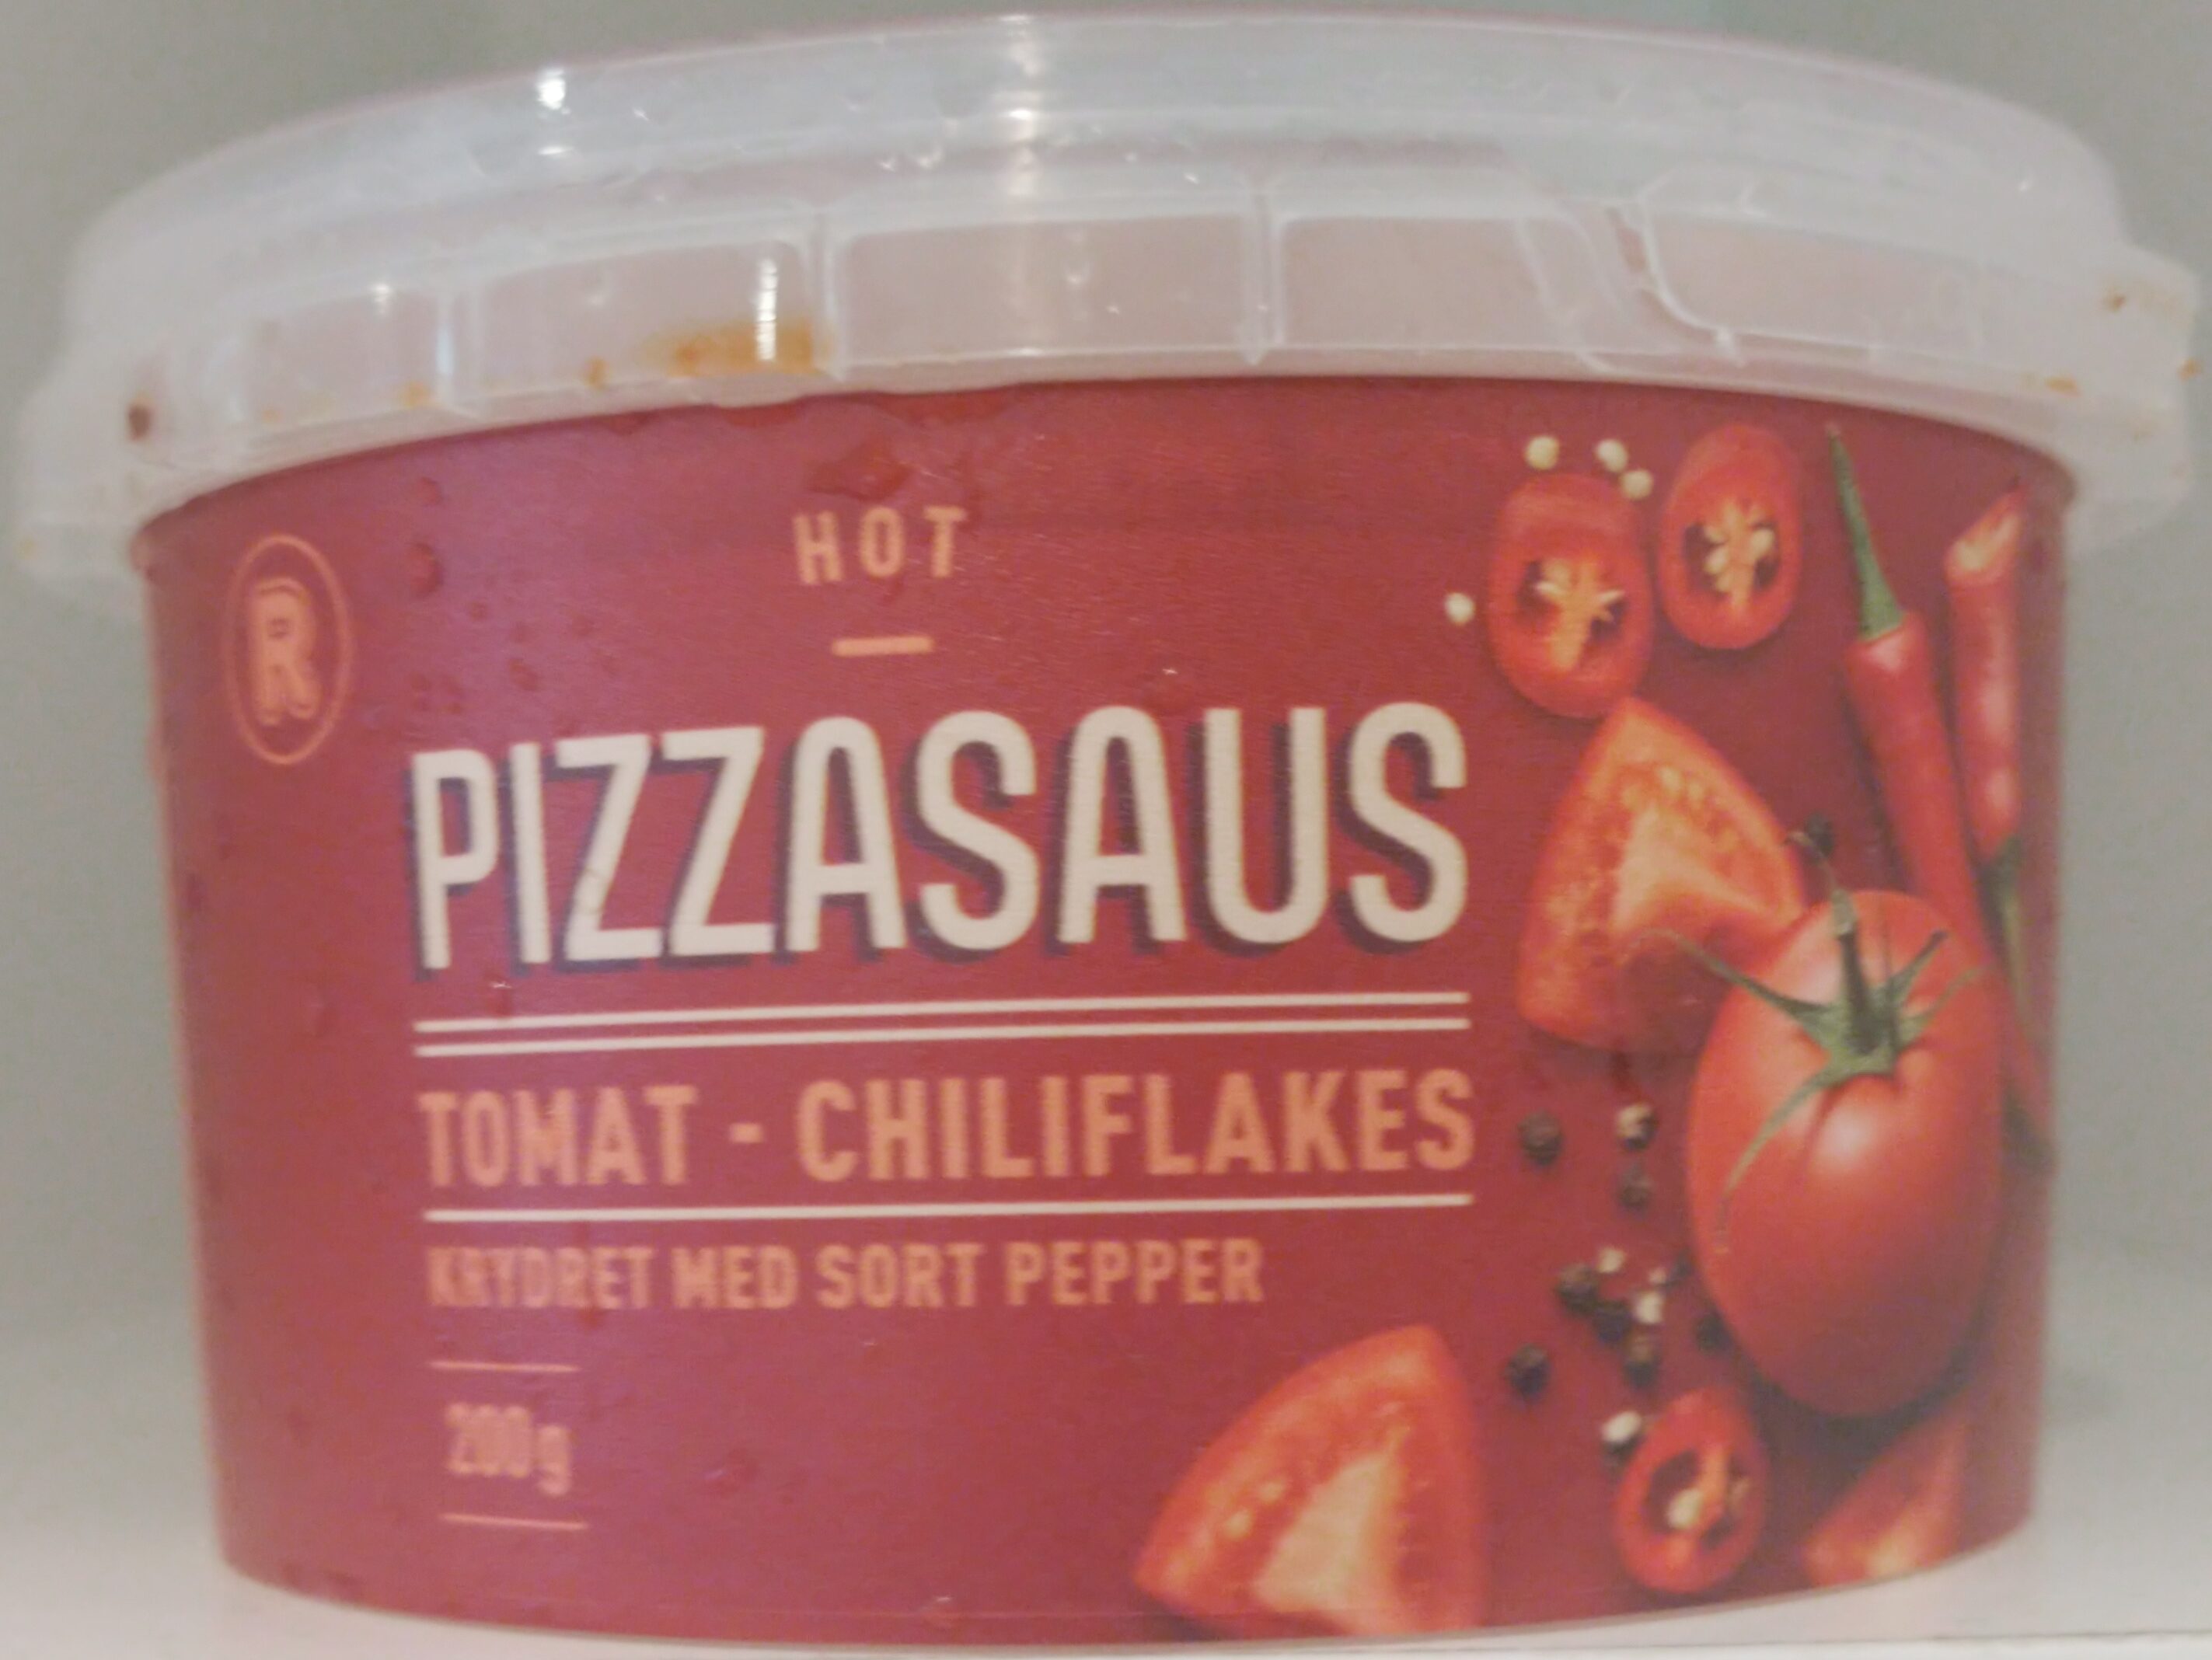 Pizzasaus Tomat - Chiliflakes krydret med sort pepper - Product - nb